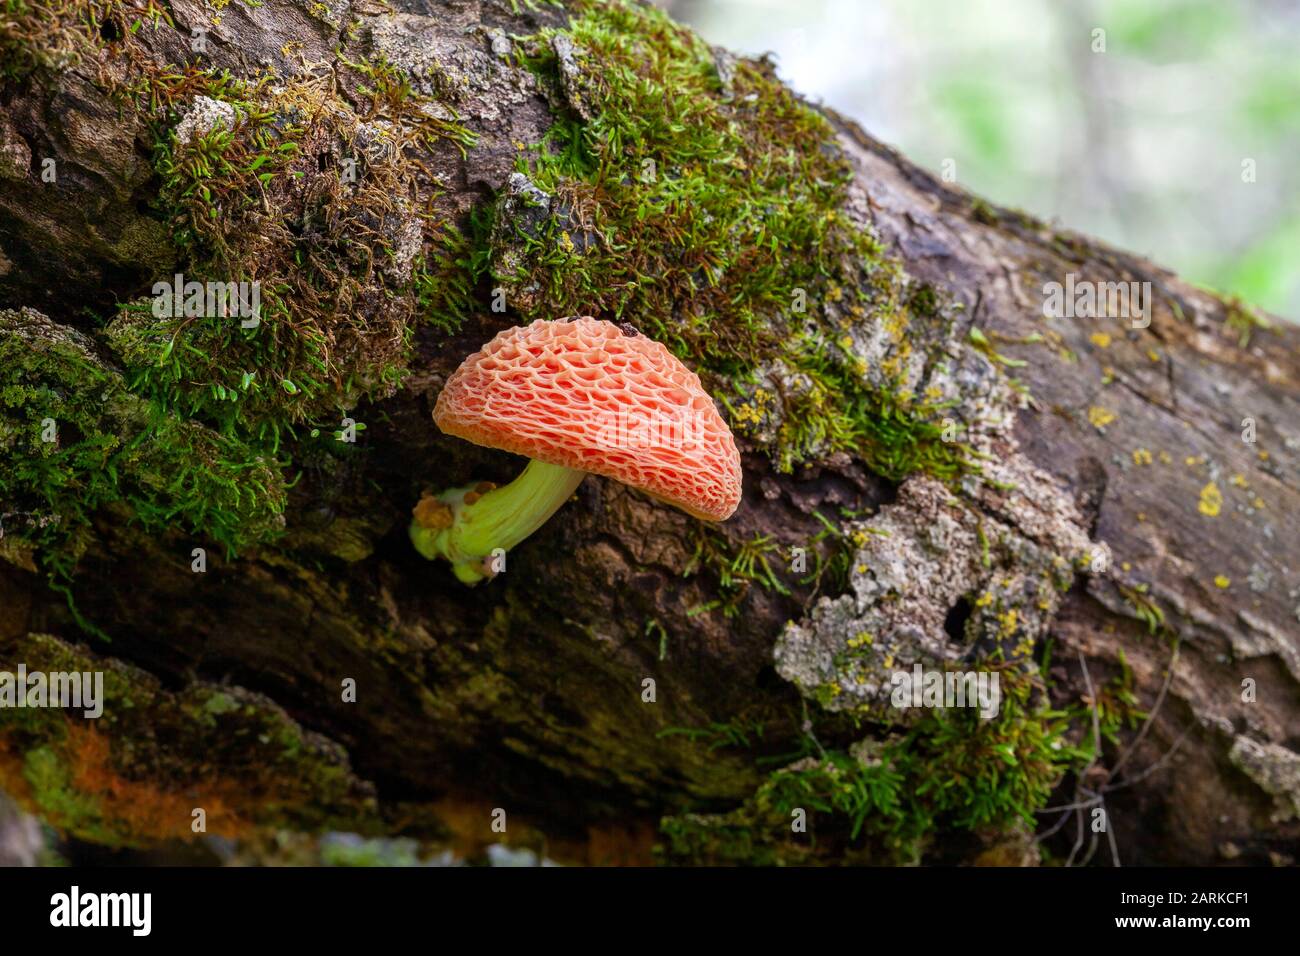 Netted Rhodotus Mushroom (Rhodotus palmatus), growing out of log in forest, Stock Photo